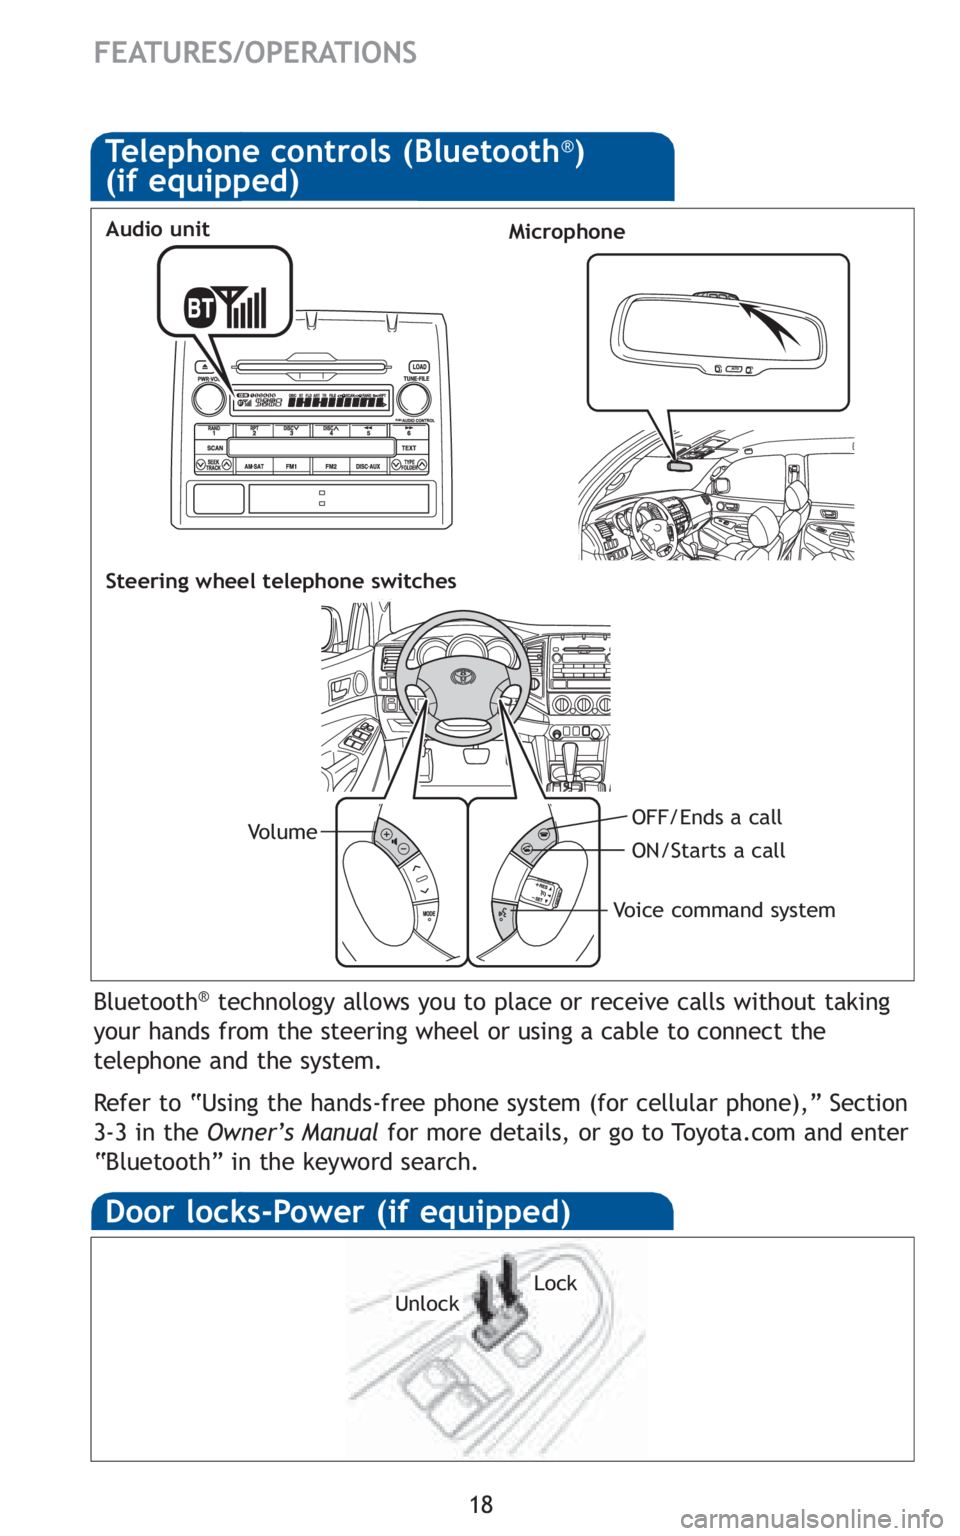 TOYOTA TACOMA 2010  Owners Manual (in English) 18
FEATURES/OPERATIONS
Door locks-Power (if equipped)
LockUnlock
Bluetooth®technology allows you to place or receive calls without taking
your hands from the steering wheel or using a cable to connec